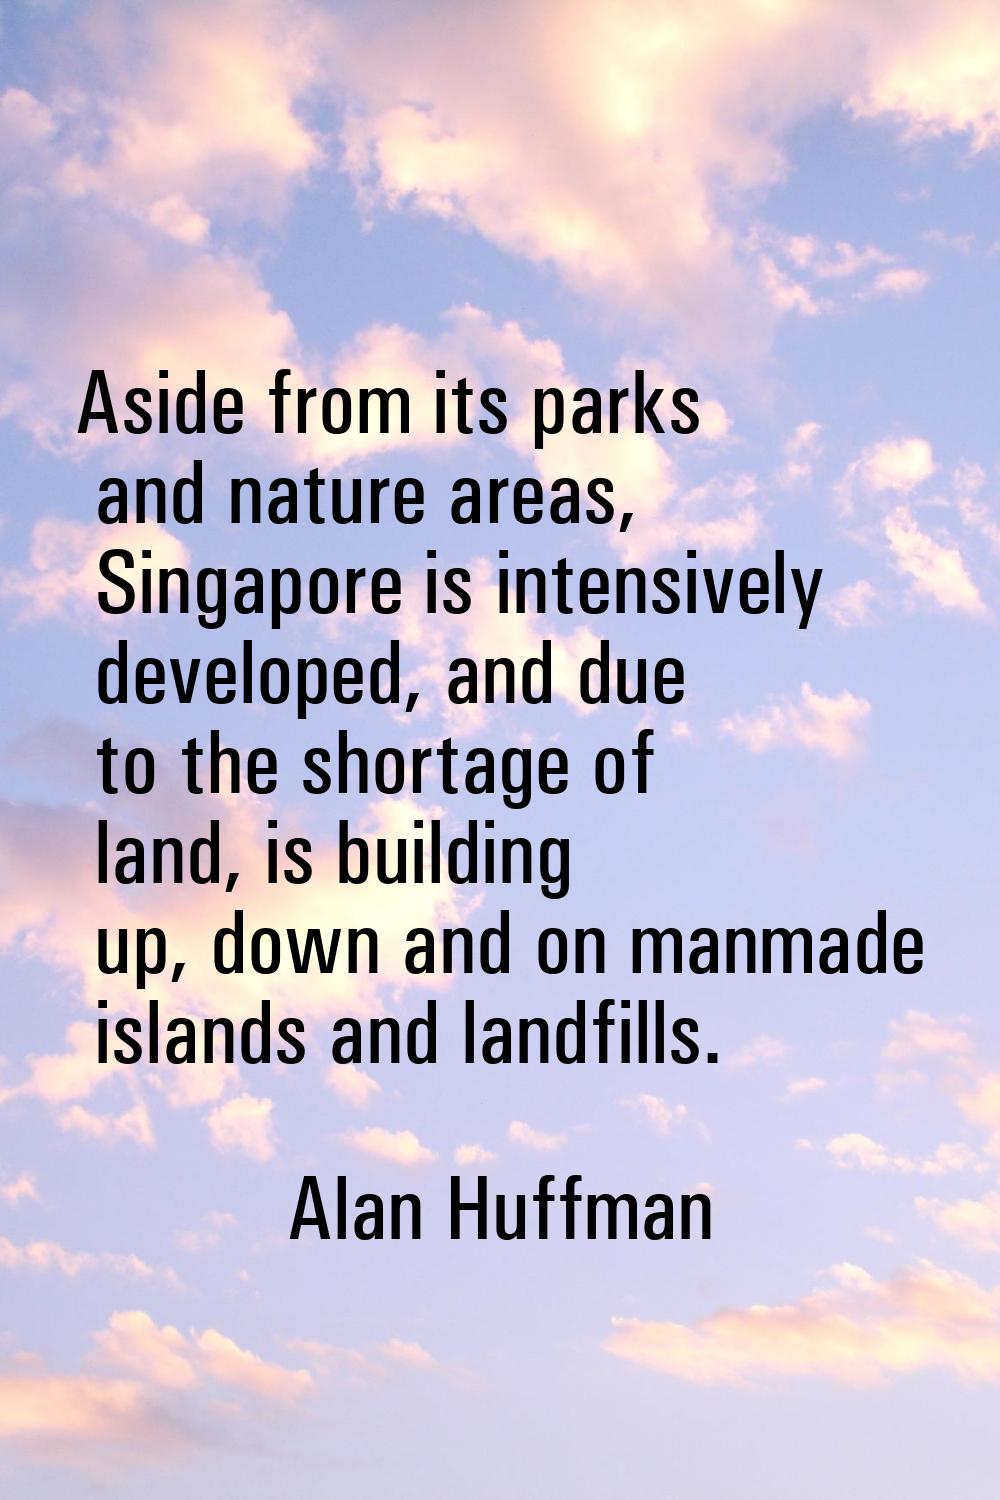 Aside from its parks and nature areas, Singapore is intensively developed, and due to the shortage 